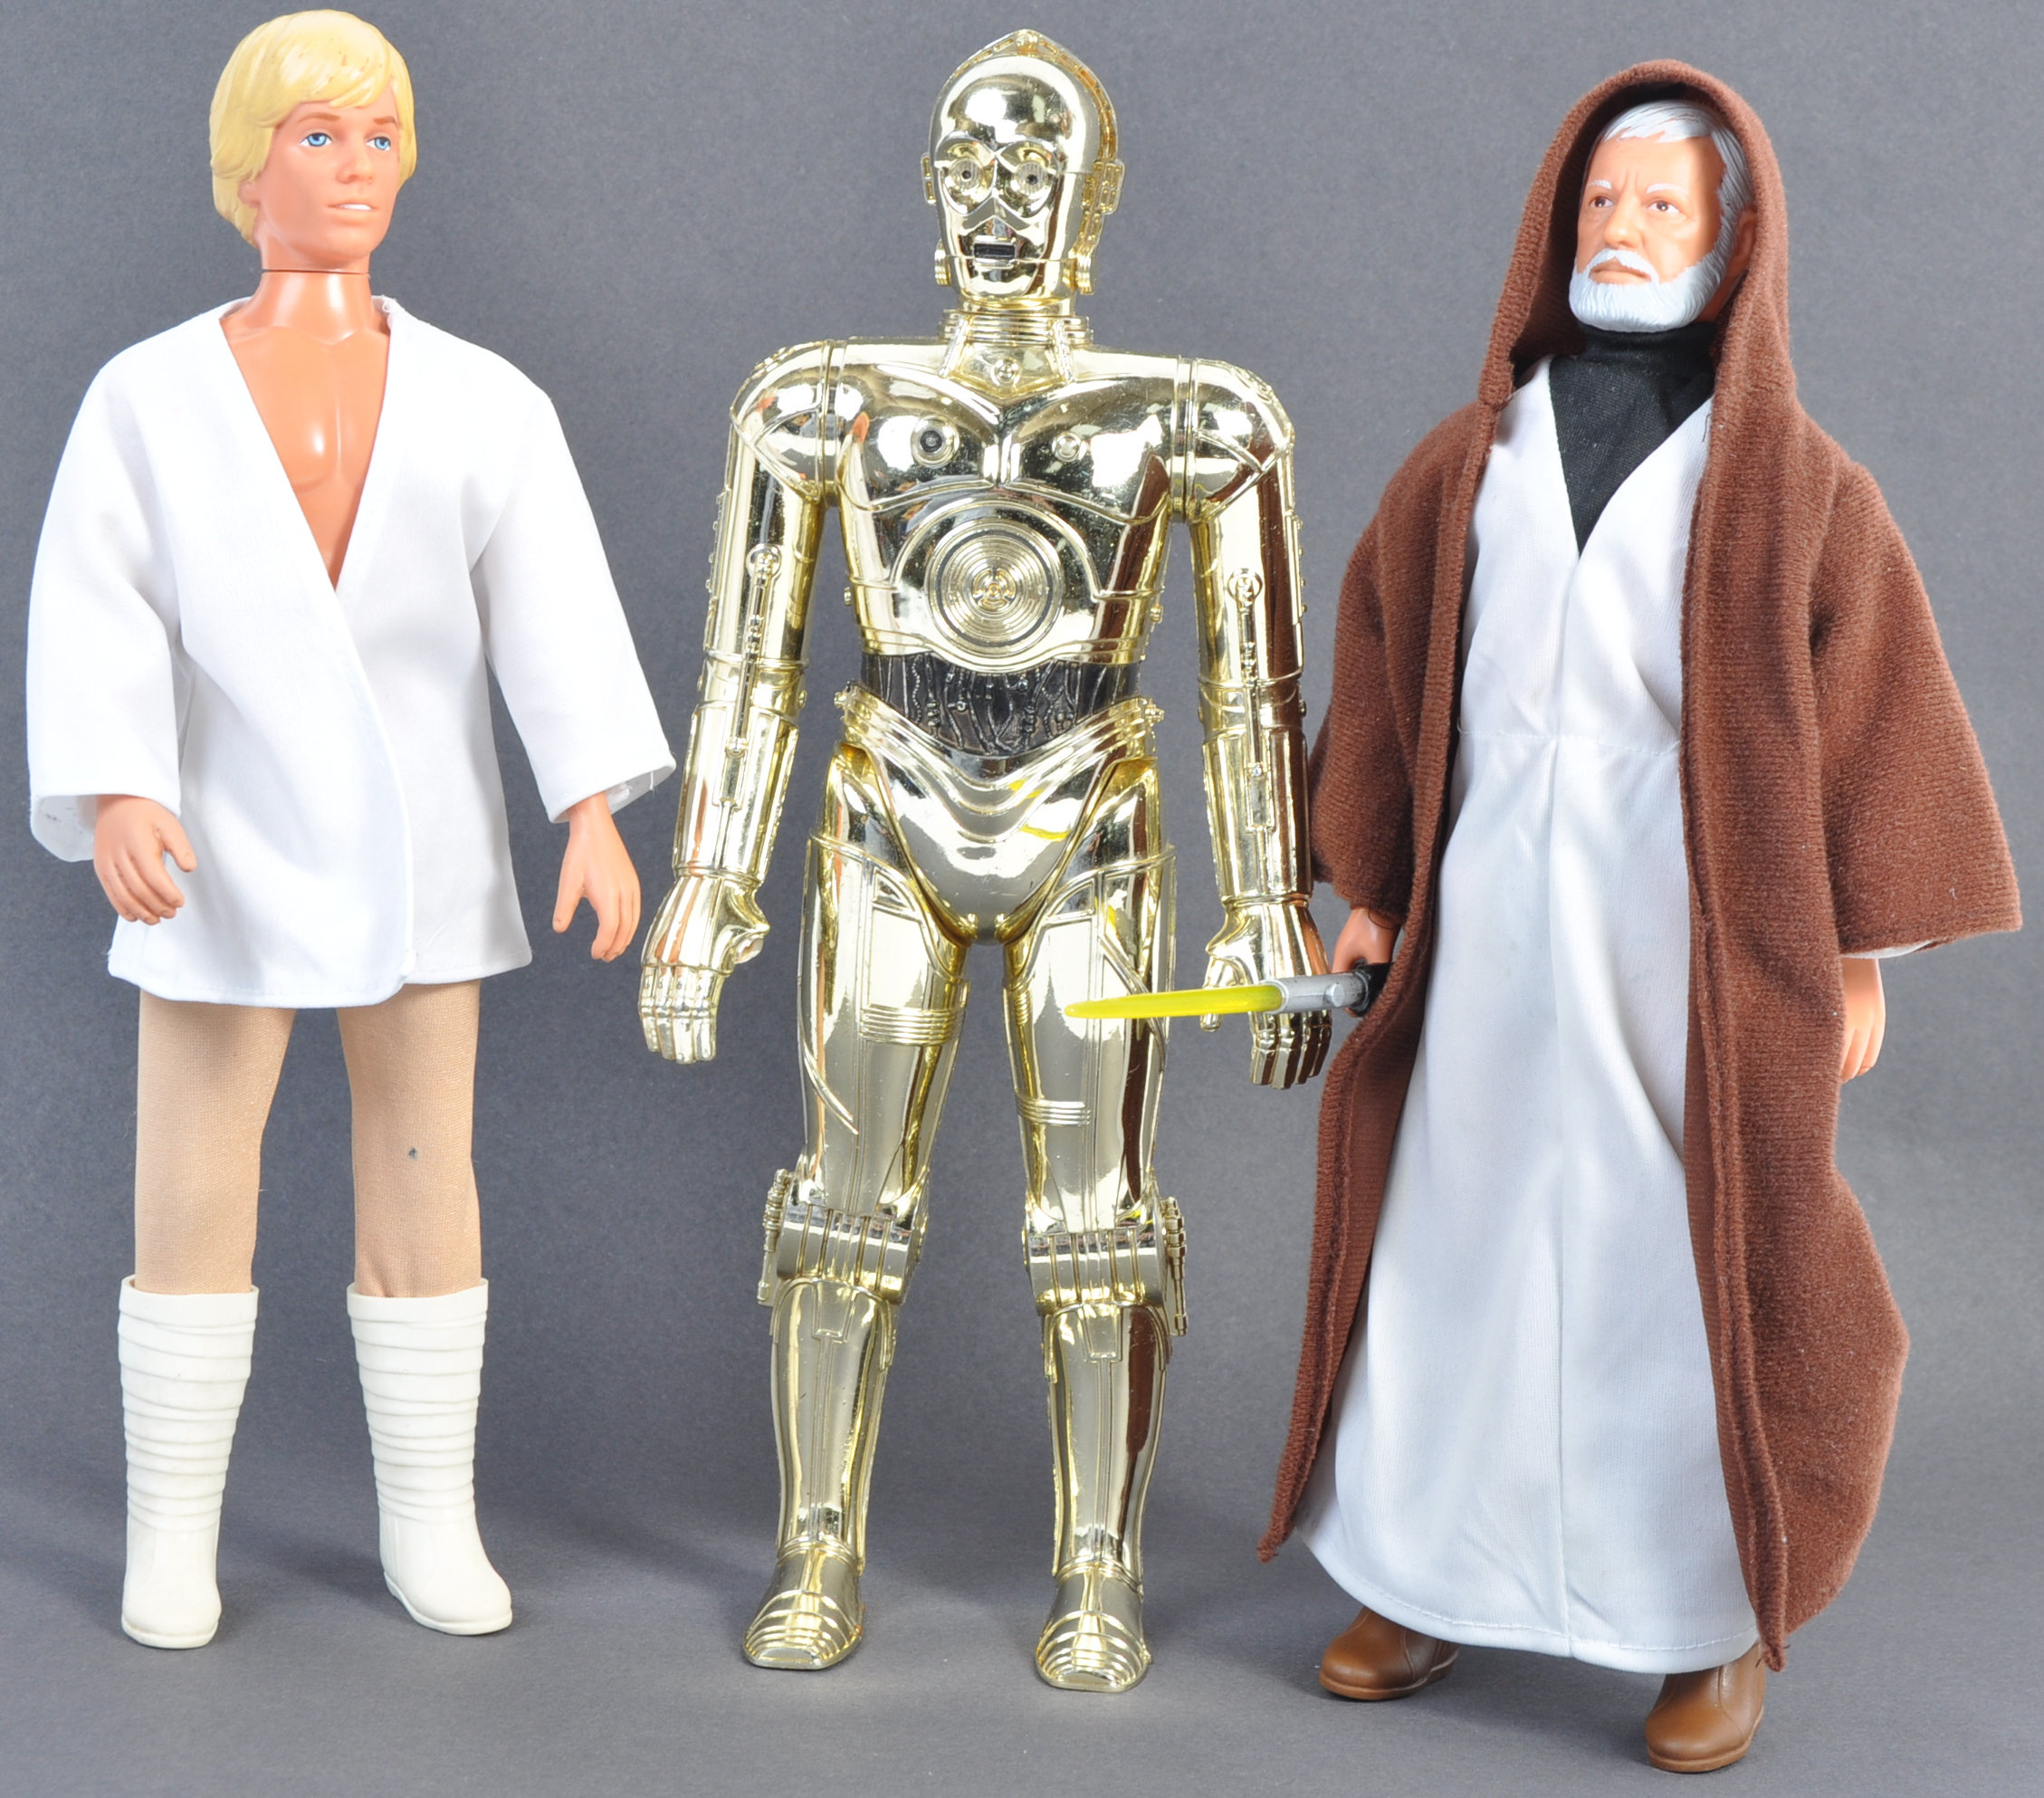 COLLECTION OF KENNER STAR WARS 12" ACTION FIGURES